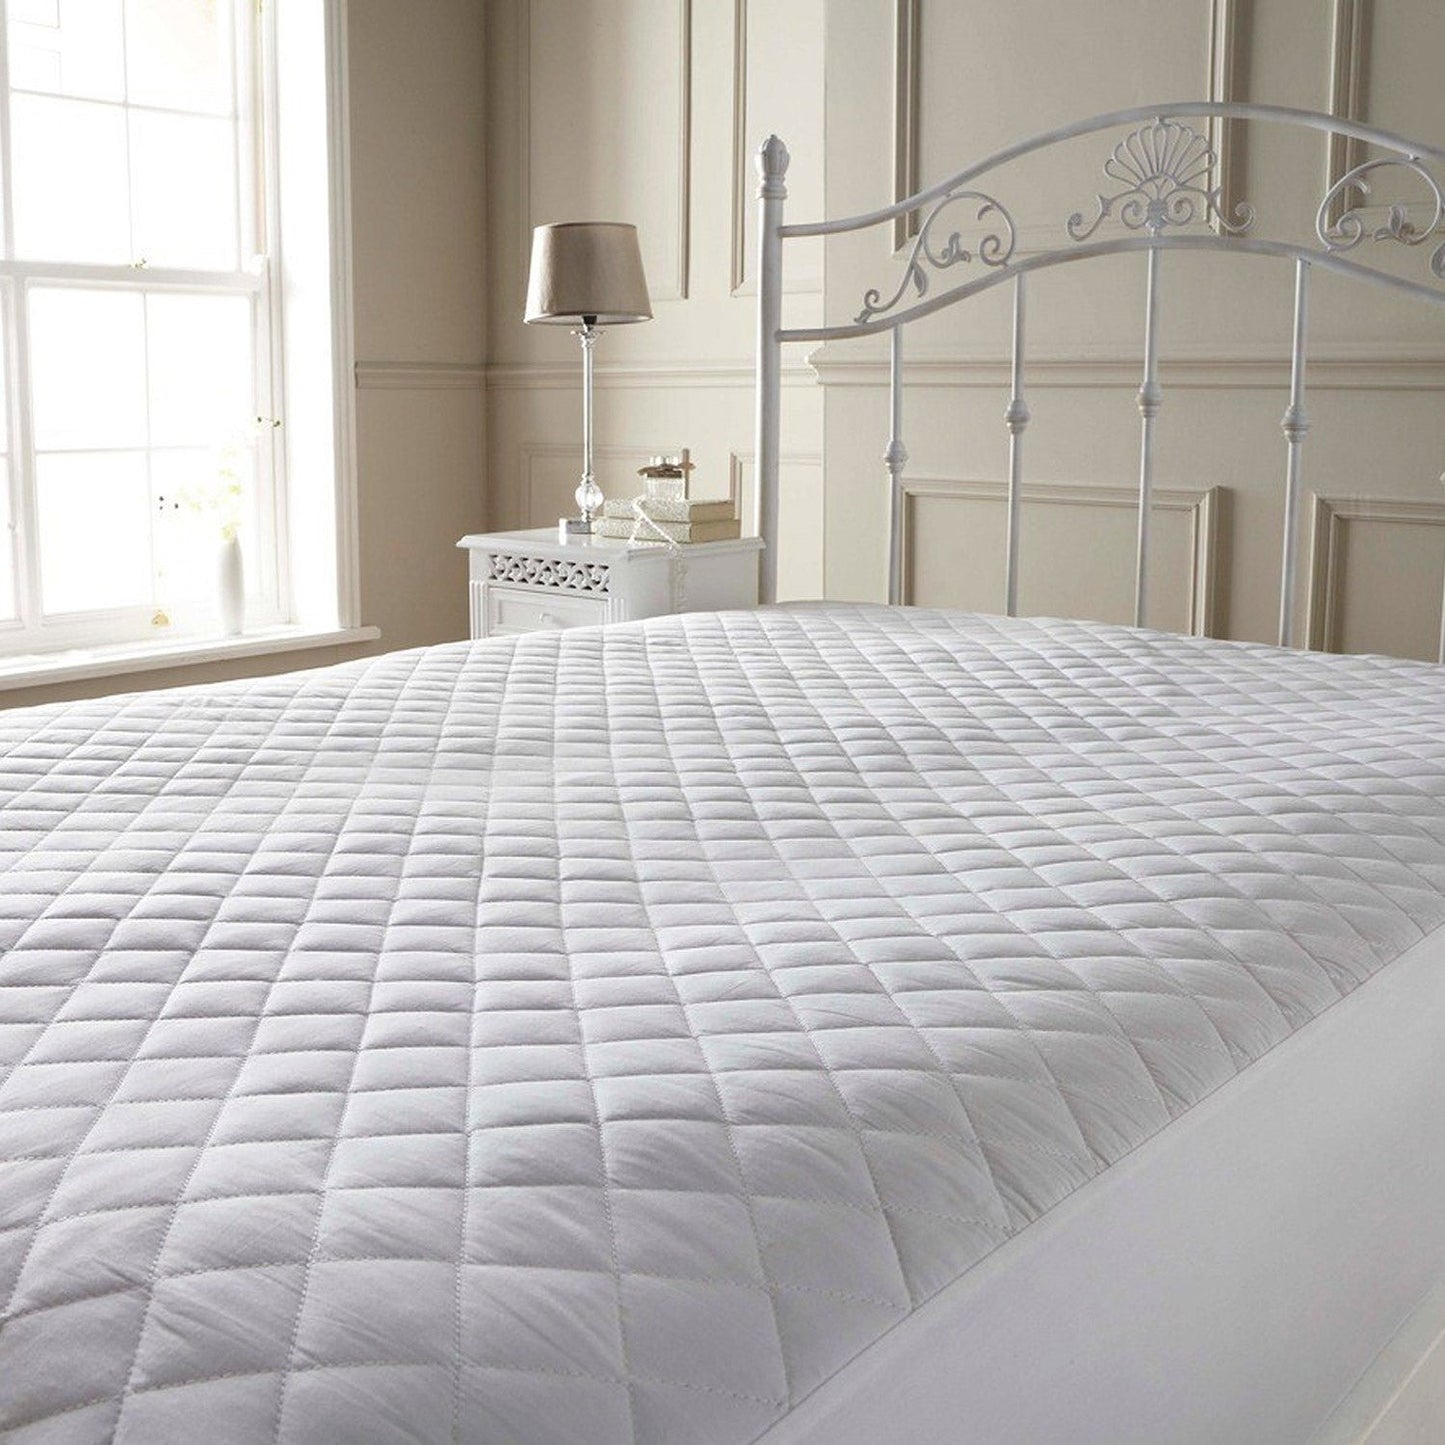 Anti-Allergy Quilted Mattress Protector